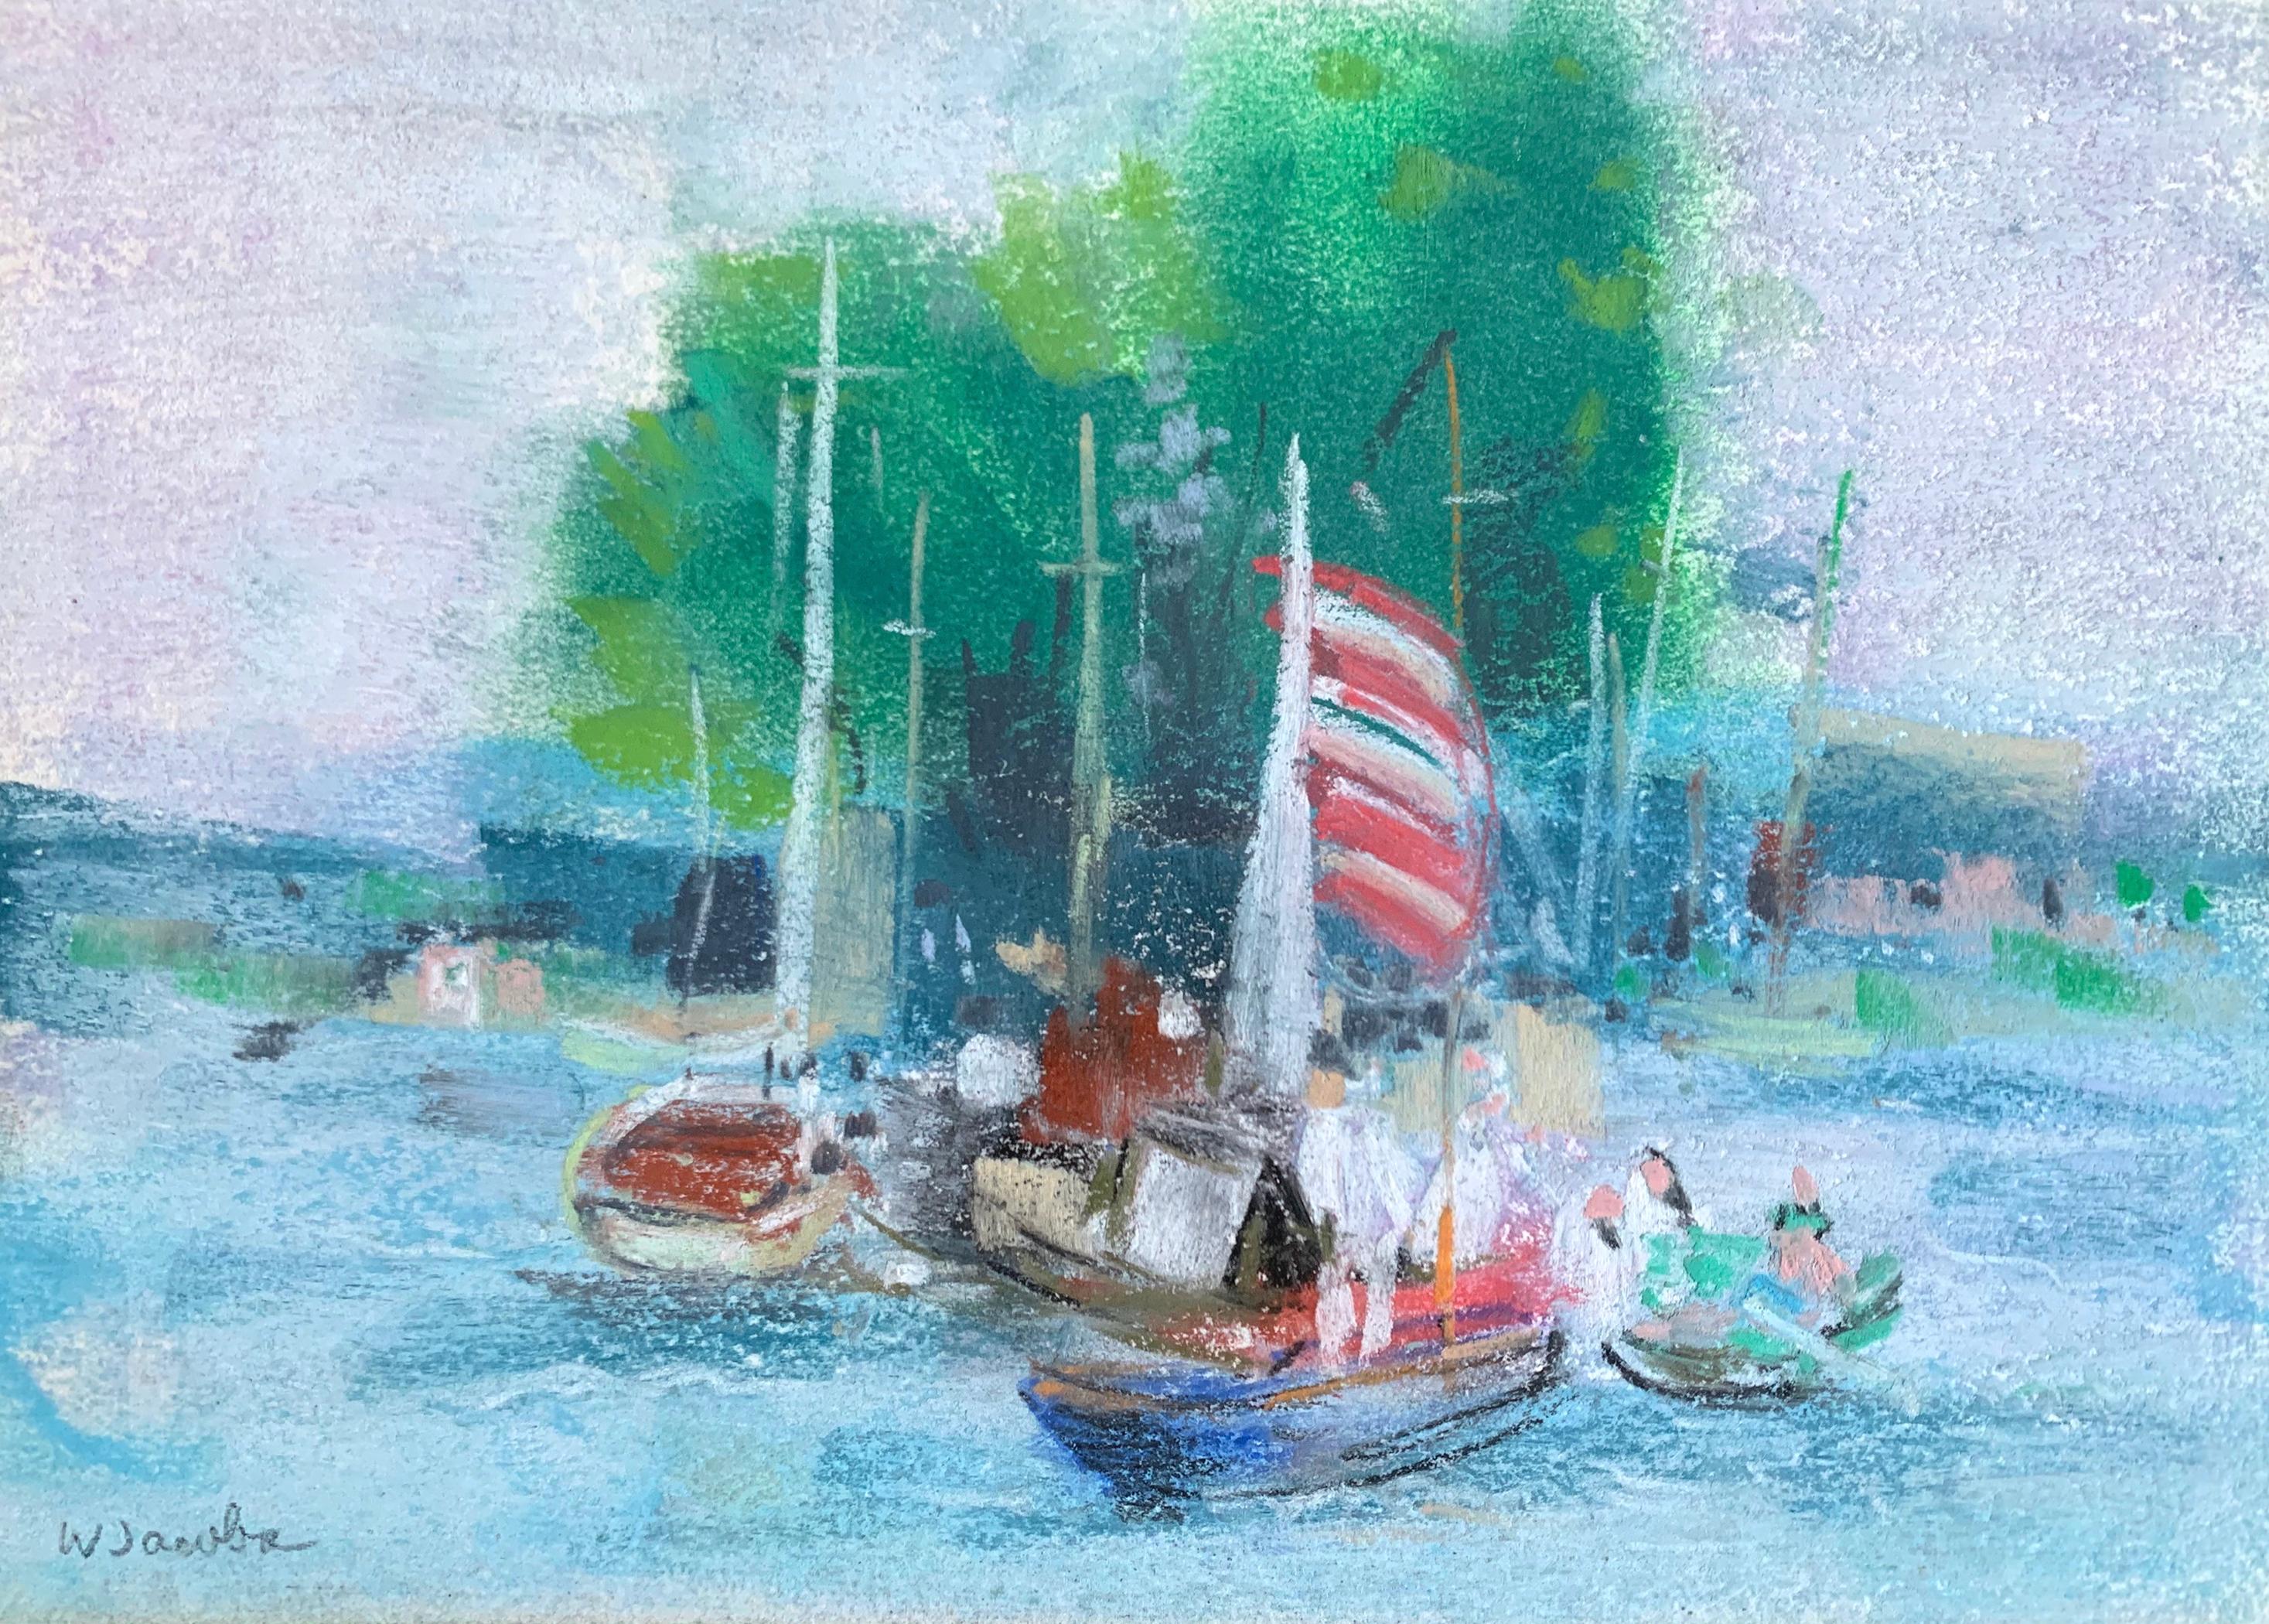 "Small Harbor" by noted Chicago painter William Jacobs (1897 - 1973) is a pastel on paper created in 1970. The artwork is signed in pencil by the artist and was never framed.

A Chicago native, William Jacobs studied at the Art Institute of Chicago